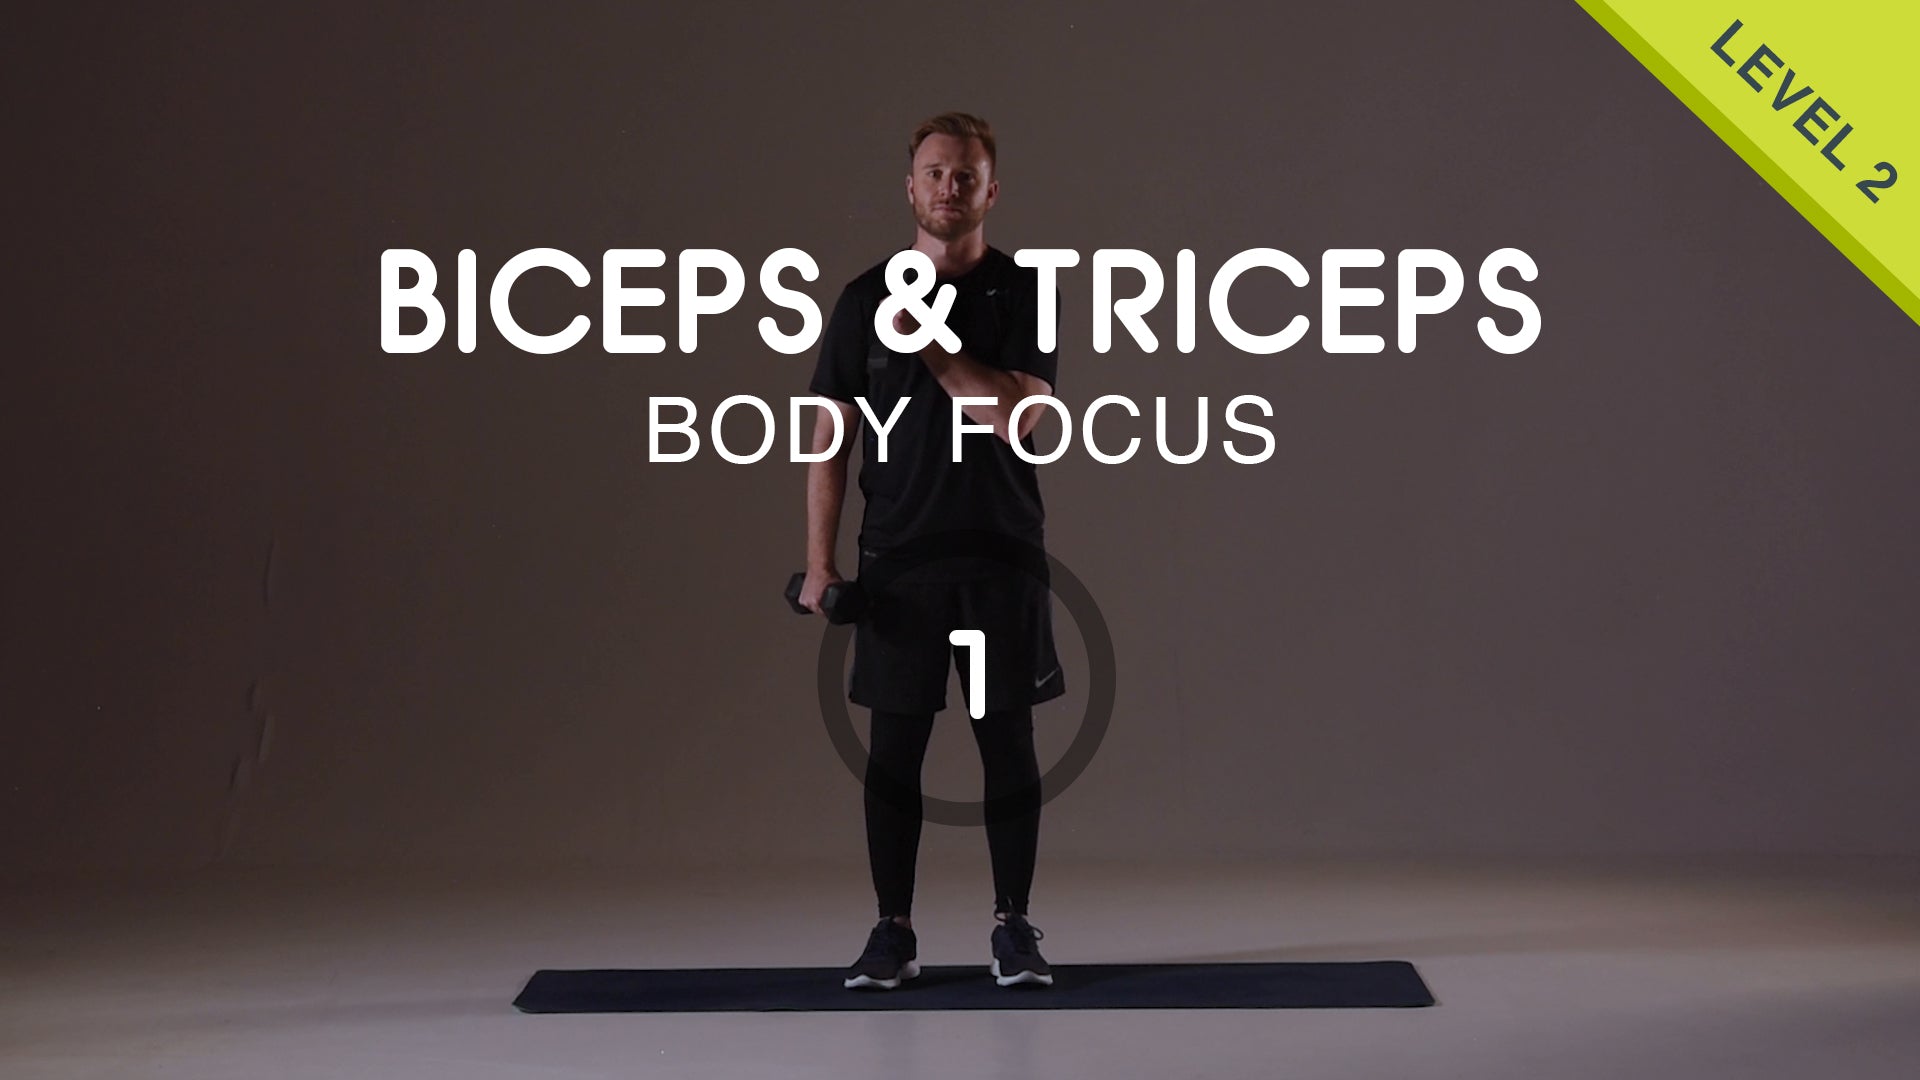 7 minute Workout - Biceps & Triceps - Free Home Workout Video – Group HIIT